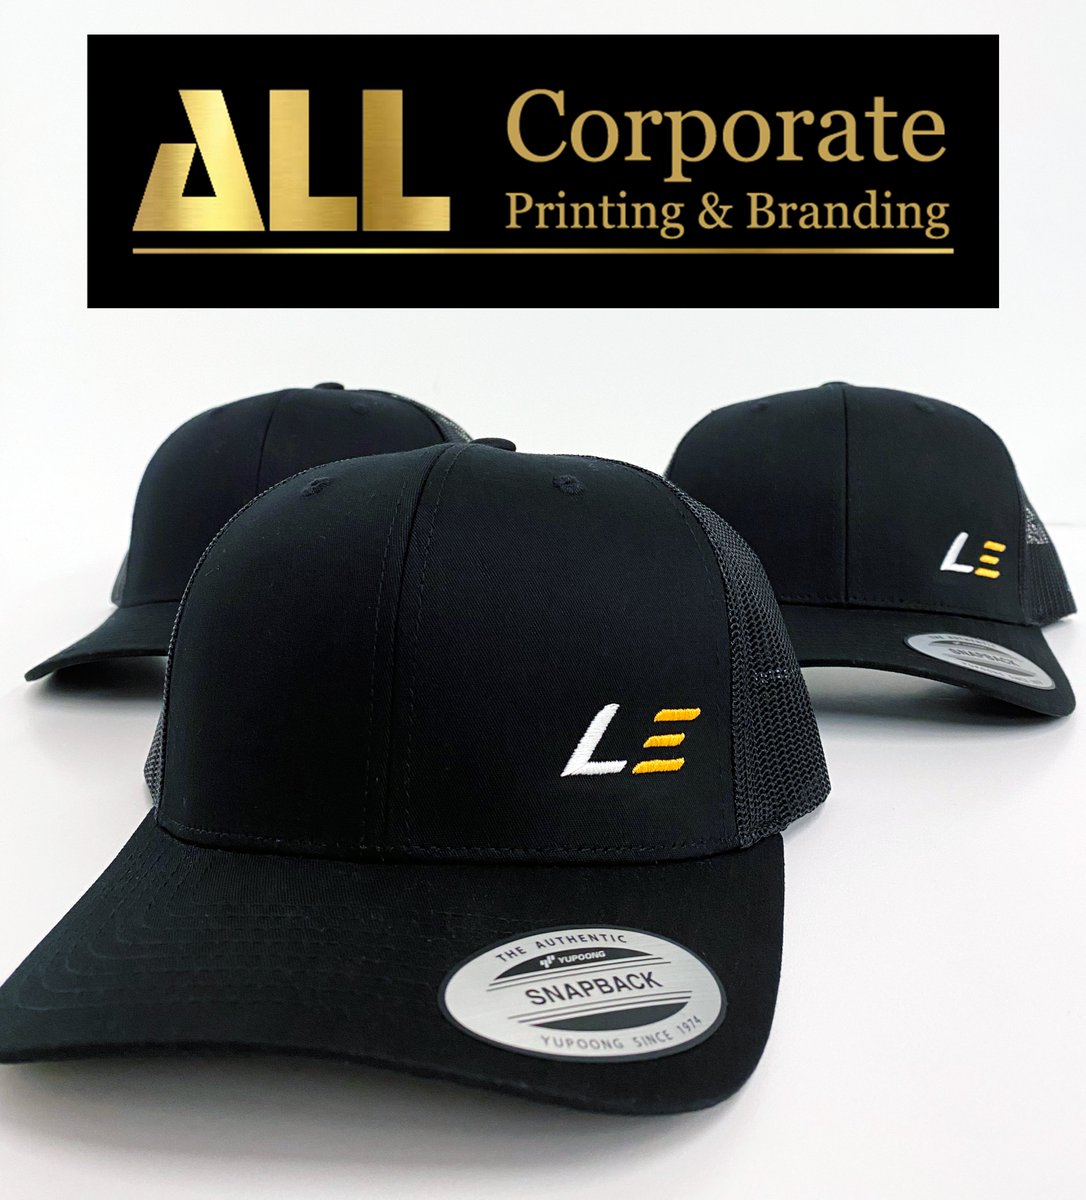 ⚡Thank you to Live Electric for allowing us this opportunity to create these custom Toques & Caps for your Team!!

Visit Them Here: live-electric.ca

Reach Out At:
🔗allprintandbrand.com
📩sales@allprintandbrand.com
☎️(519) 897 5528

#LiveElectric #Toques #Caps #Custom